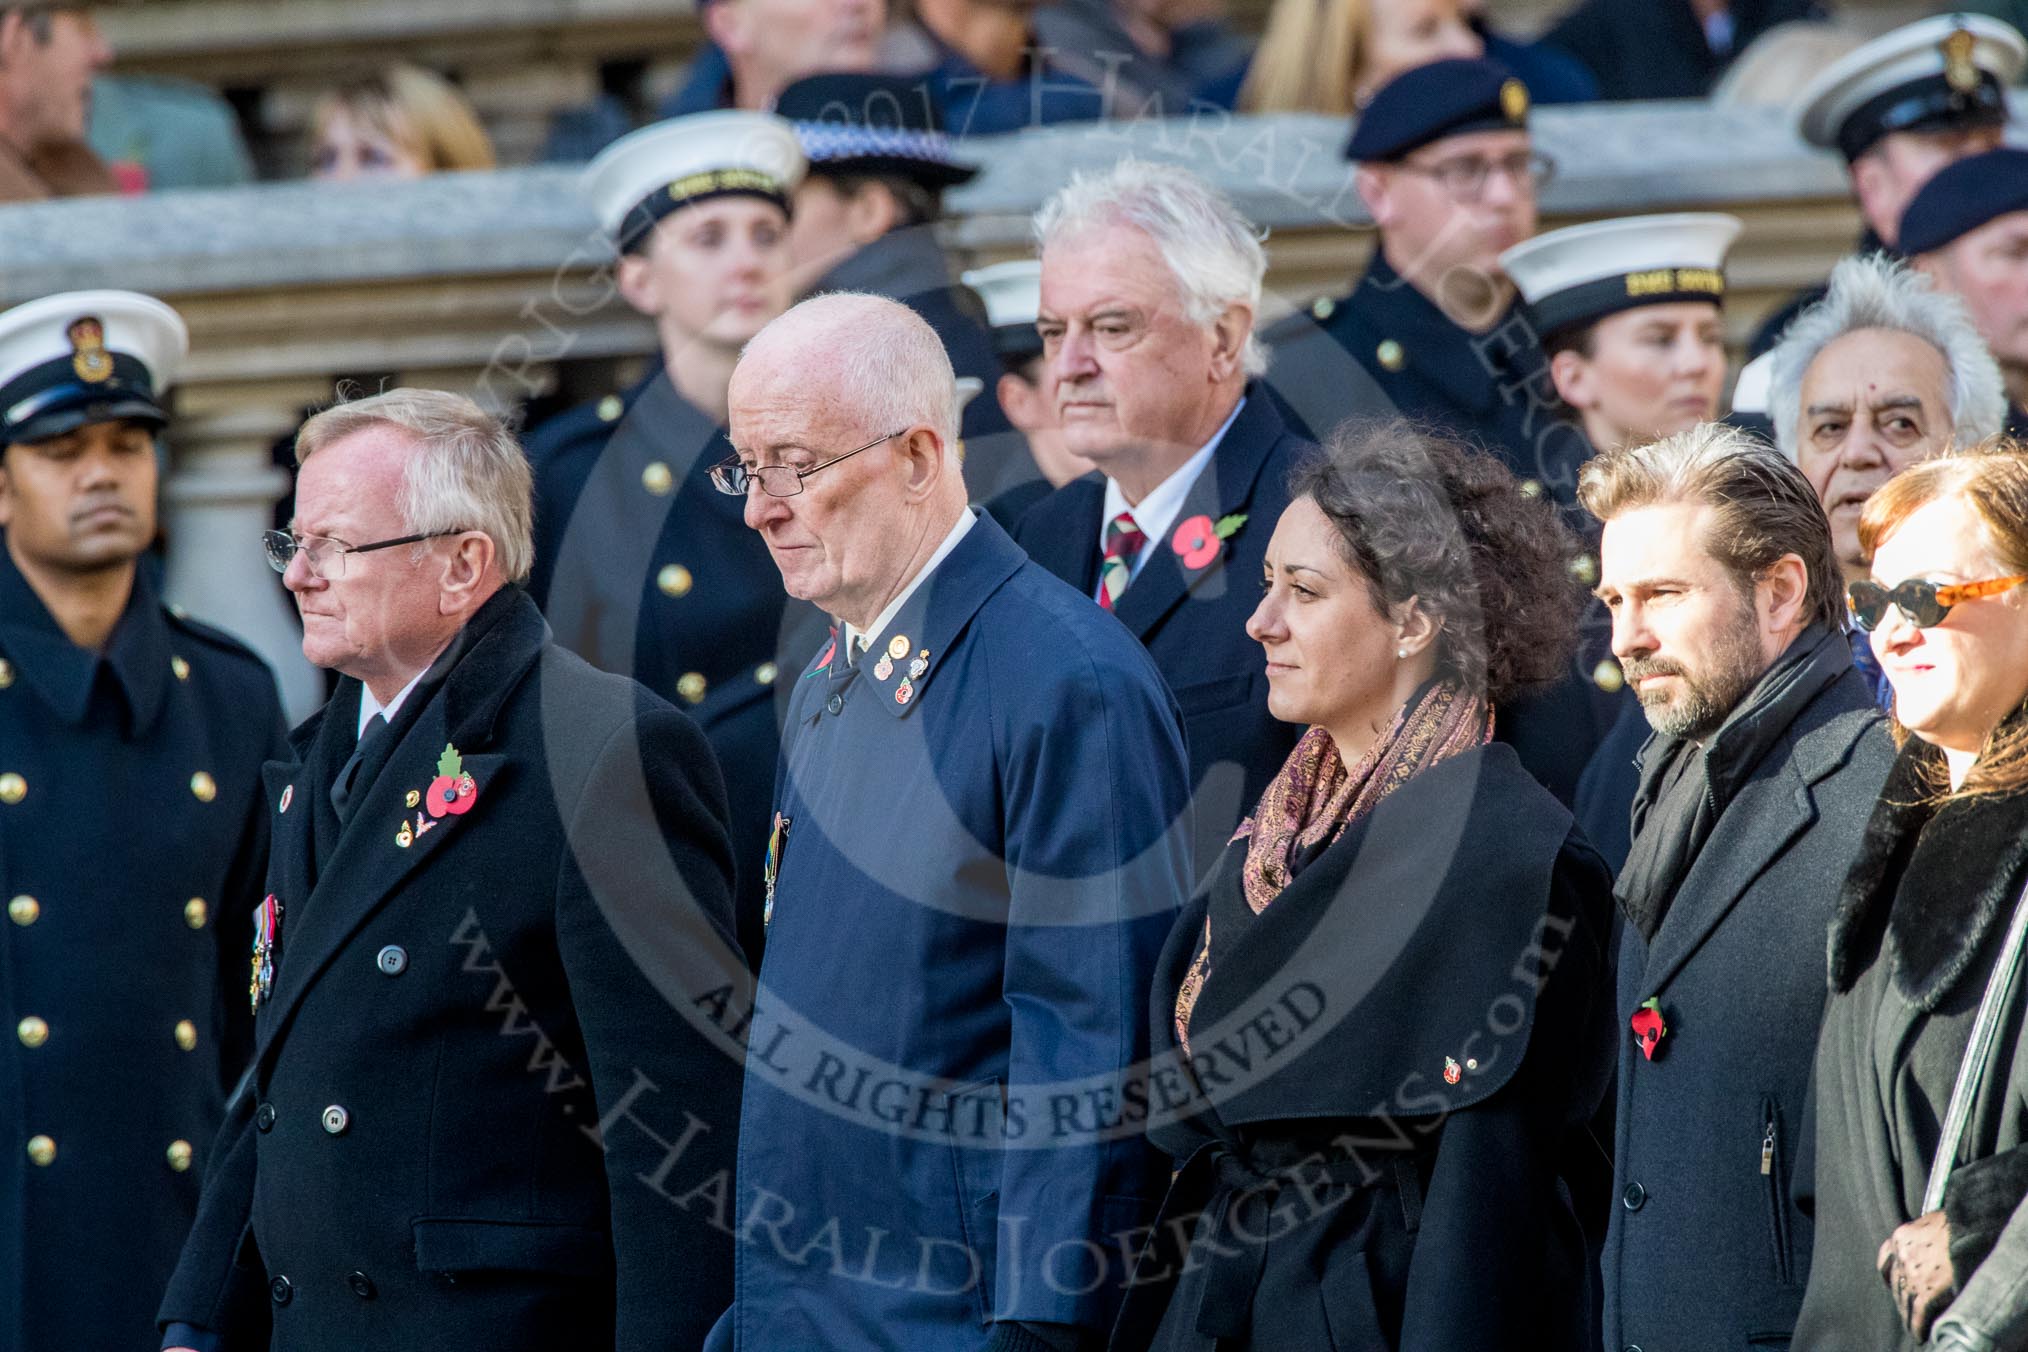 Rotary International (Group M32, 24 members) during the Royal British Legion March Past on Remembrance Sunday at the Cenotaph, Whitehall, Westminster, London, 11 November 2018, 12:28.